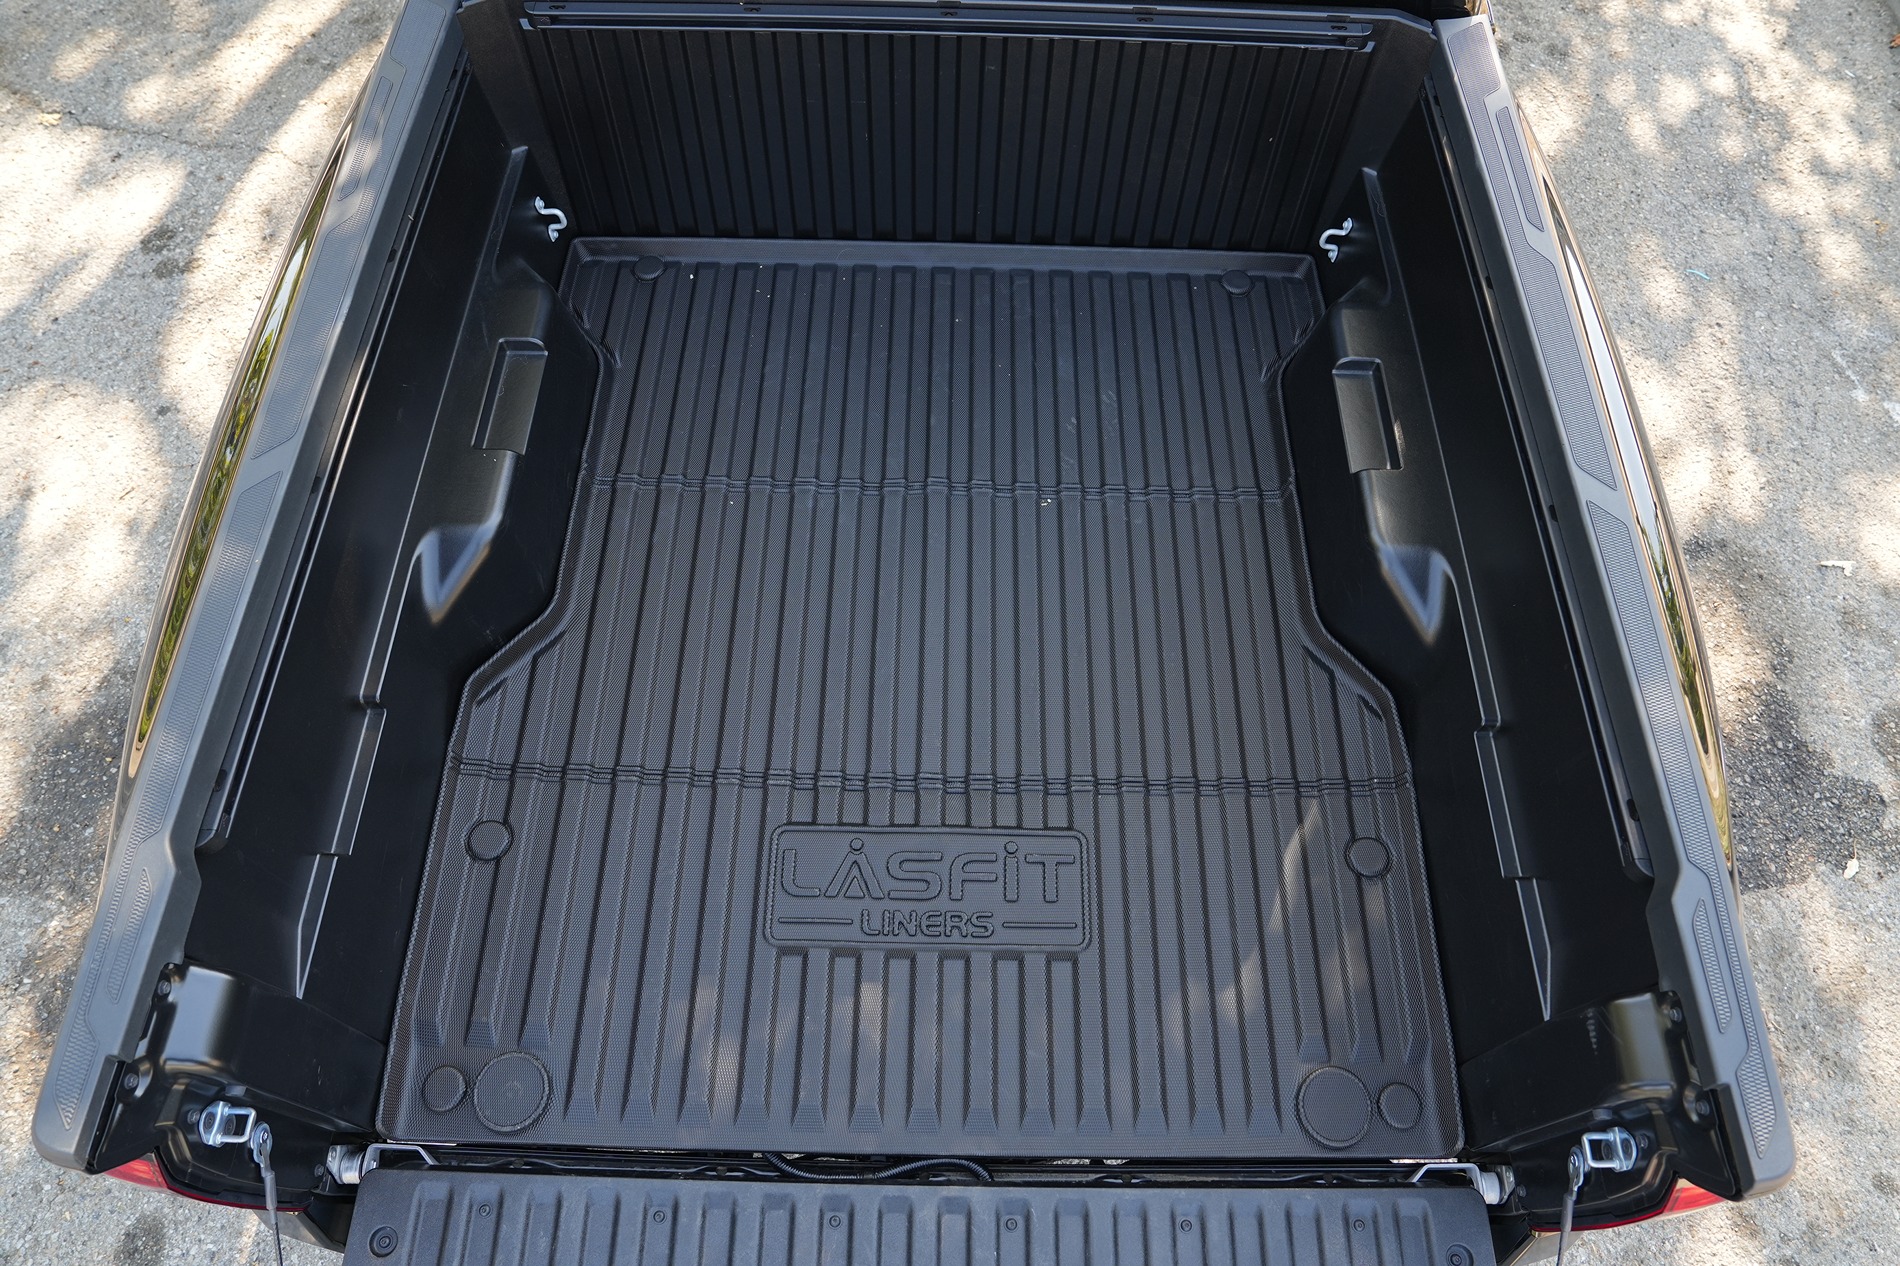 2024 Tacoma The 2024 Tacoma New Products Have Hit the Market | Lasfit Bed Liners High Quality Toyota Tacoma 2024 Bed Liners